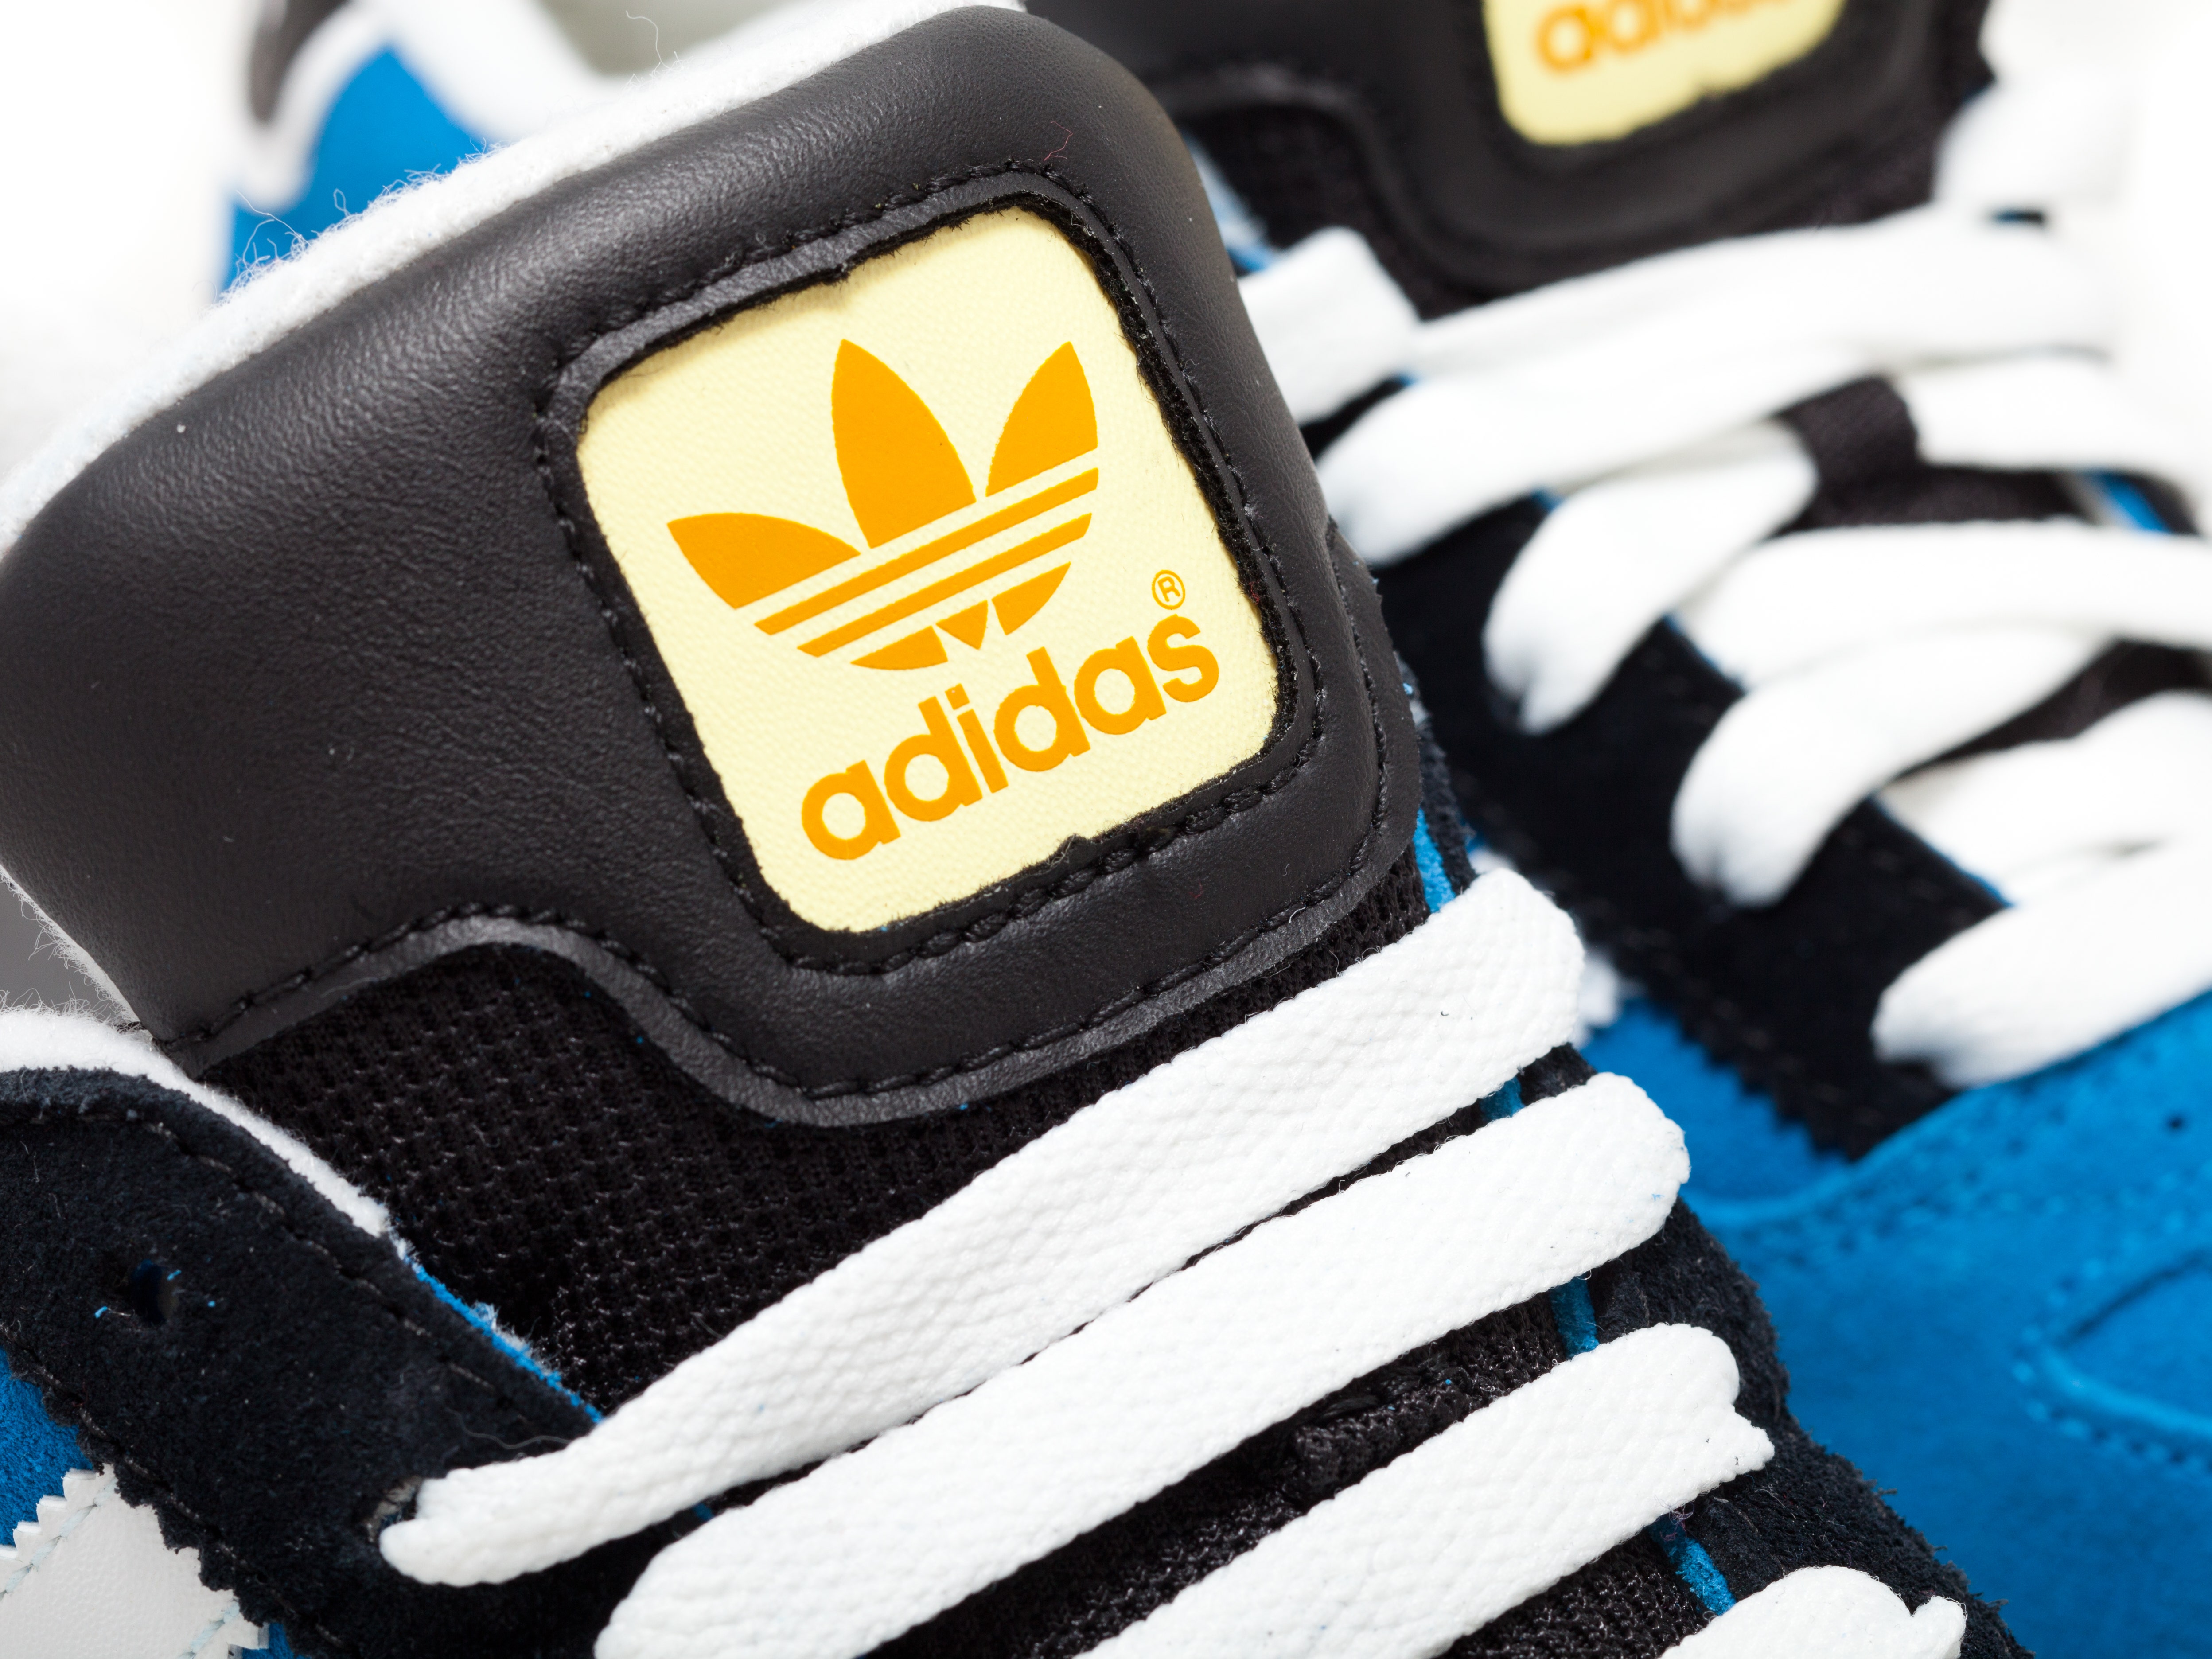 Why the Soviet Special Forces loved Adidas - and how they tried to